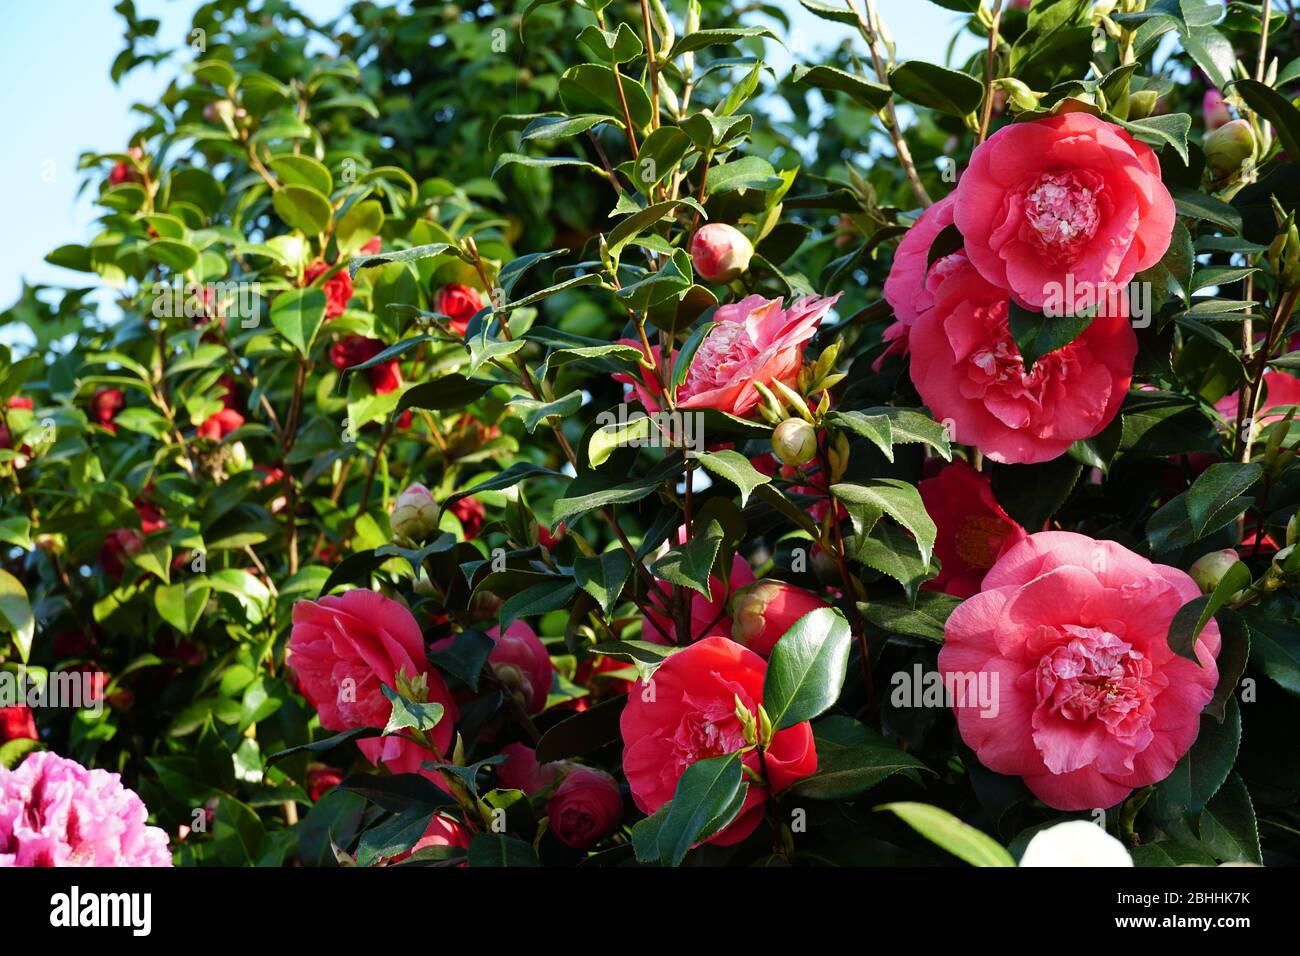 Camellia bush with dark pink flowers in different stages of bloom with green shiny leaves. Stock Photo